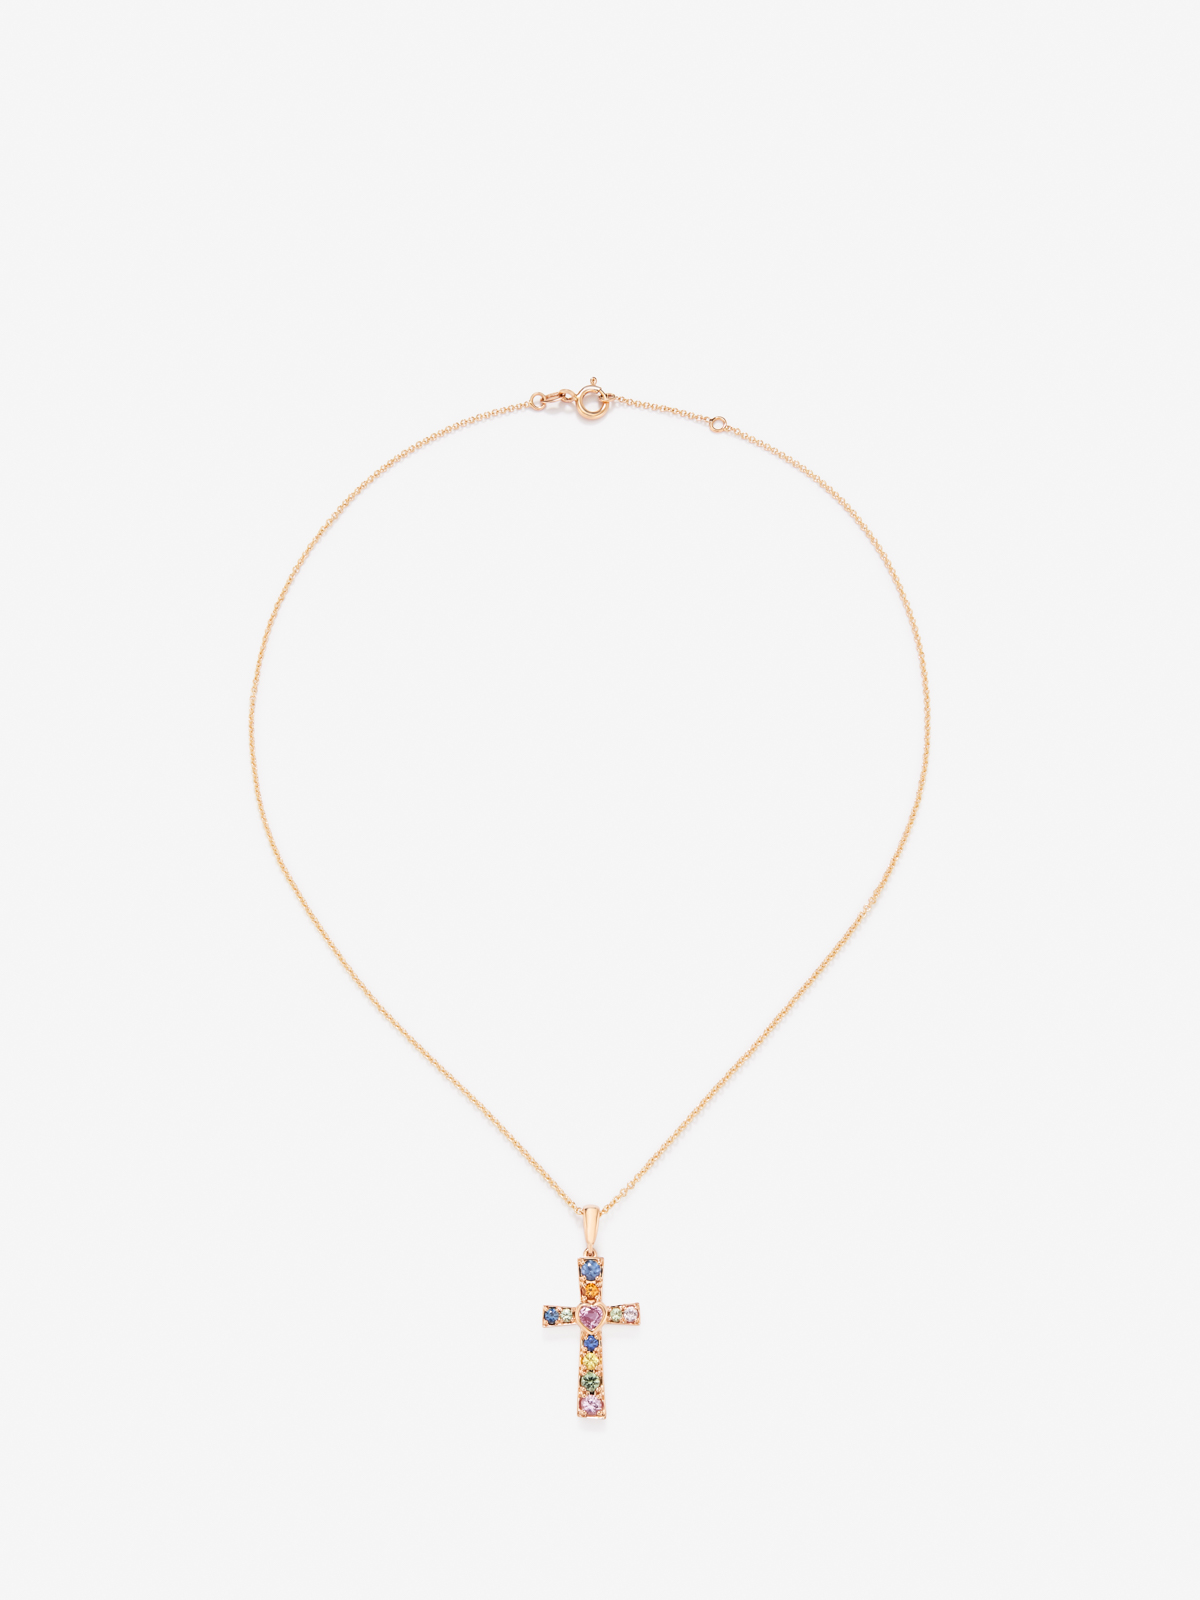 18K Rose Gold Cross Pendant Chain with Sapphire